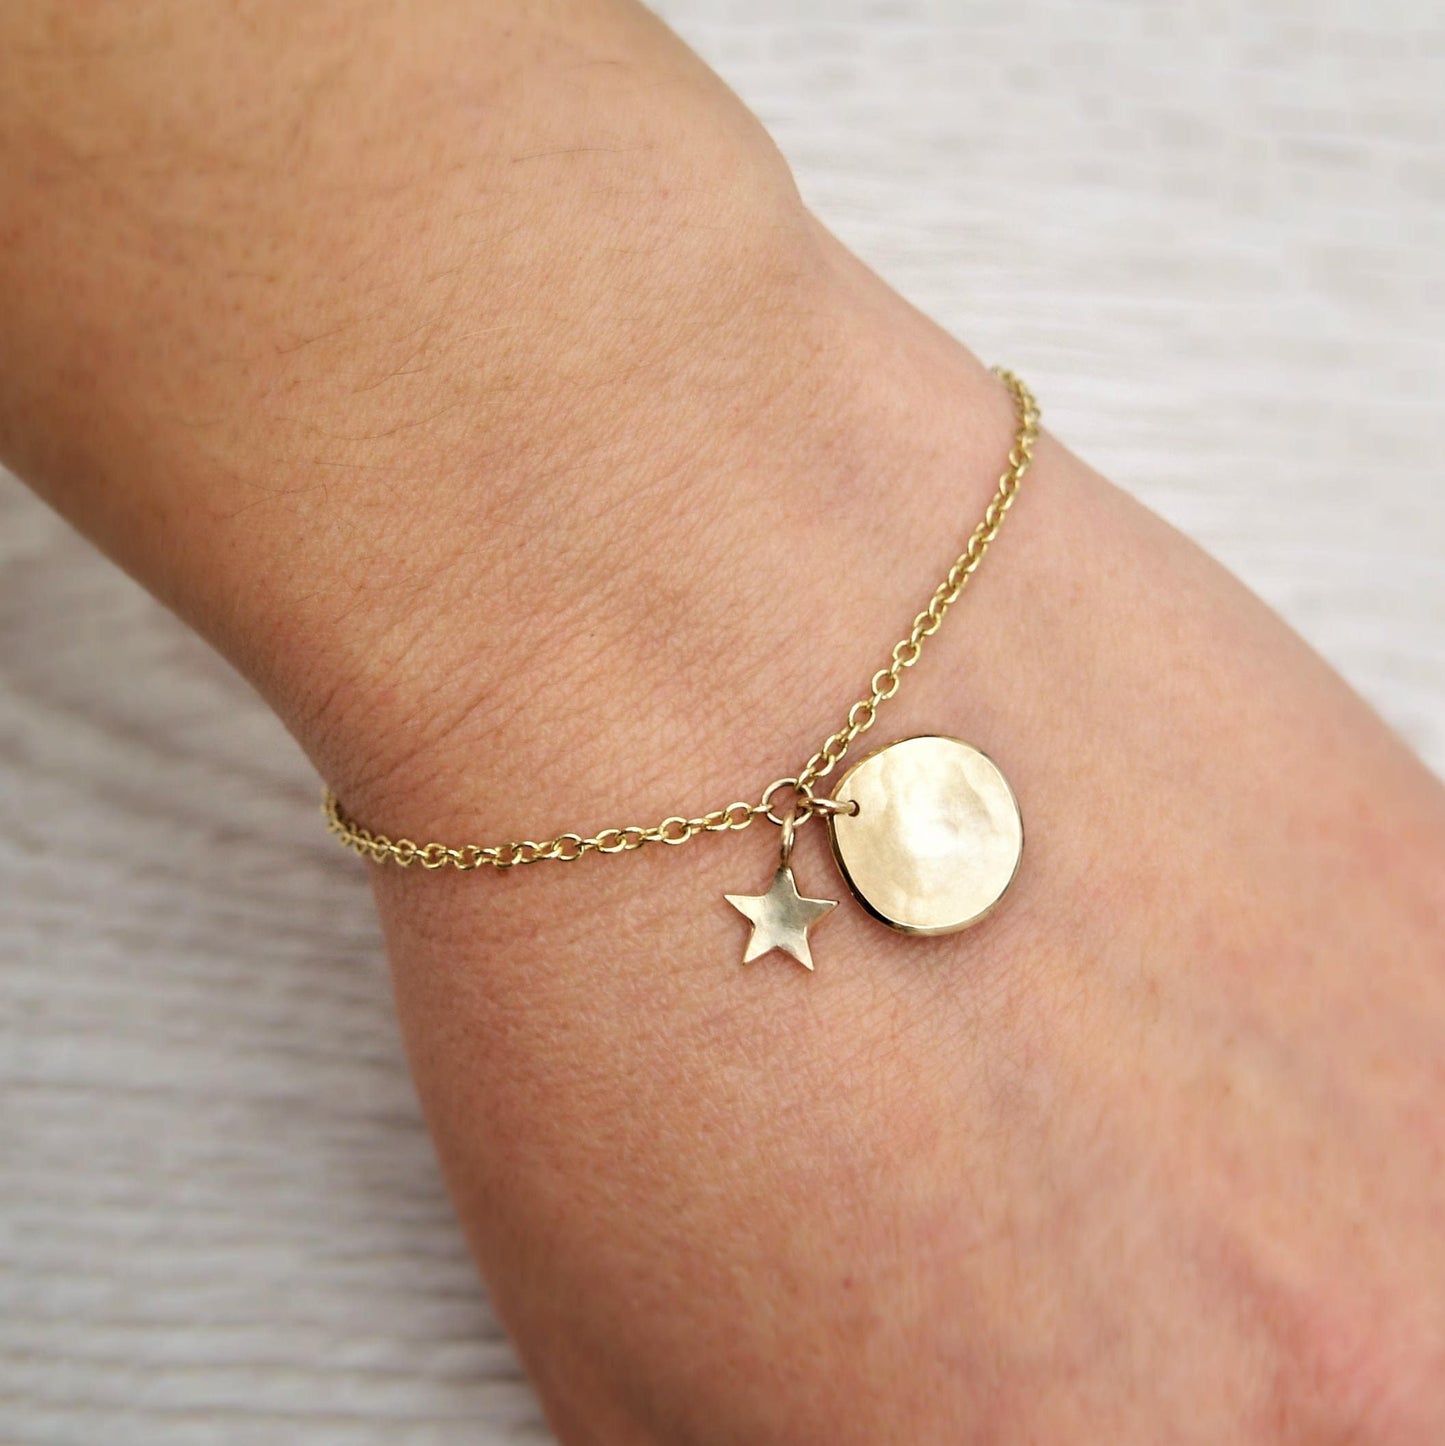 Handmade to order - 9ct yellow gold chain bracelet with a medium size petal and star charm